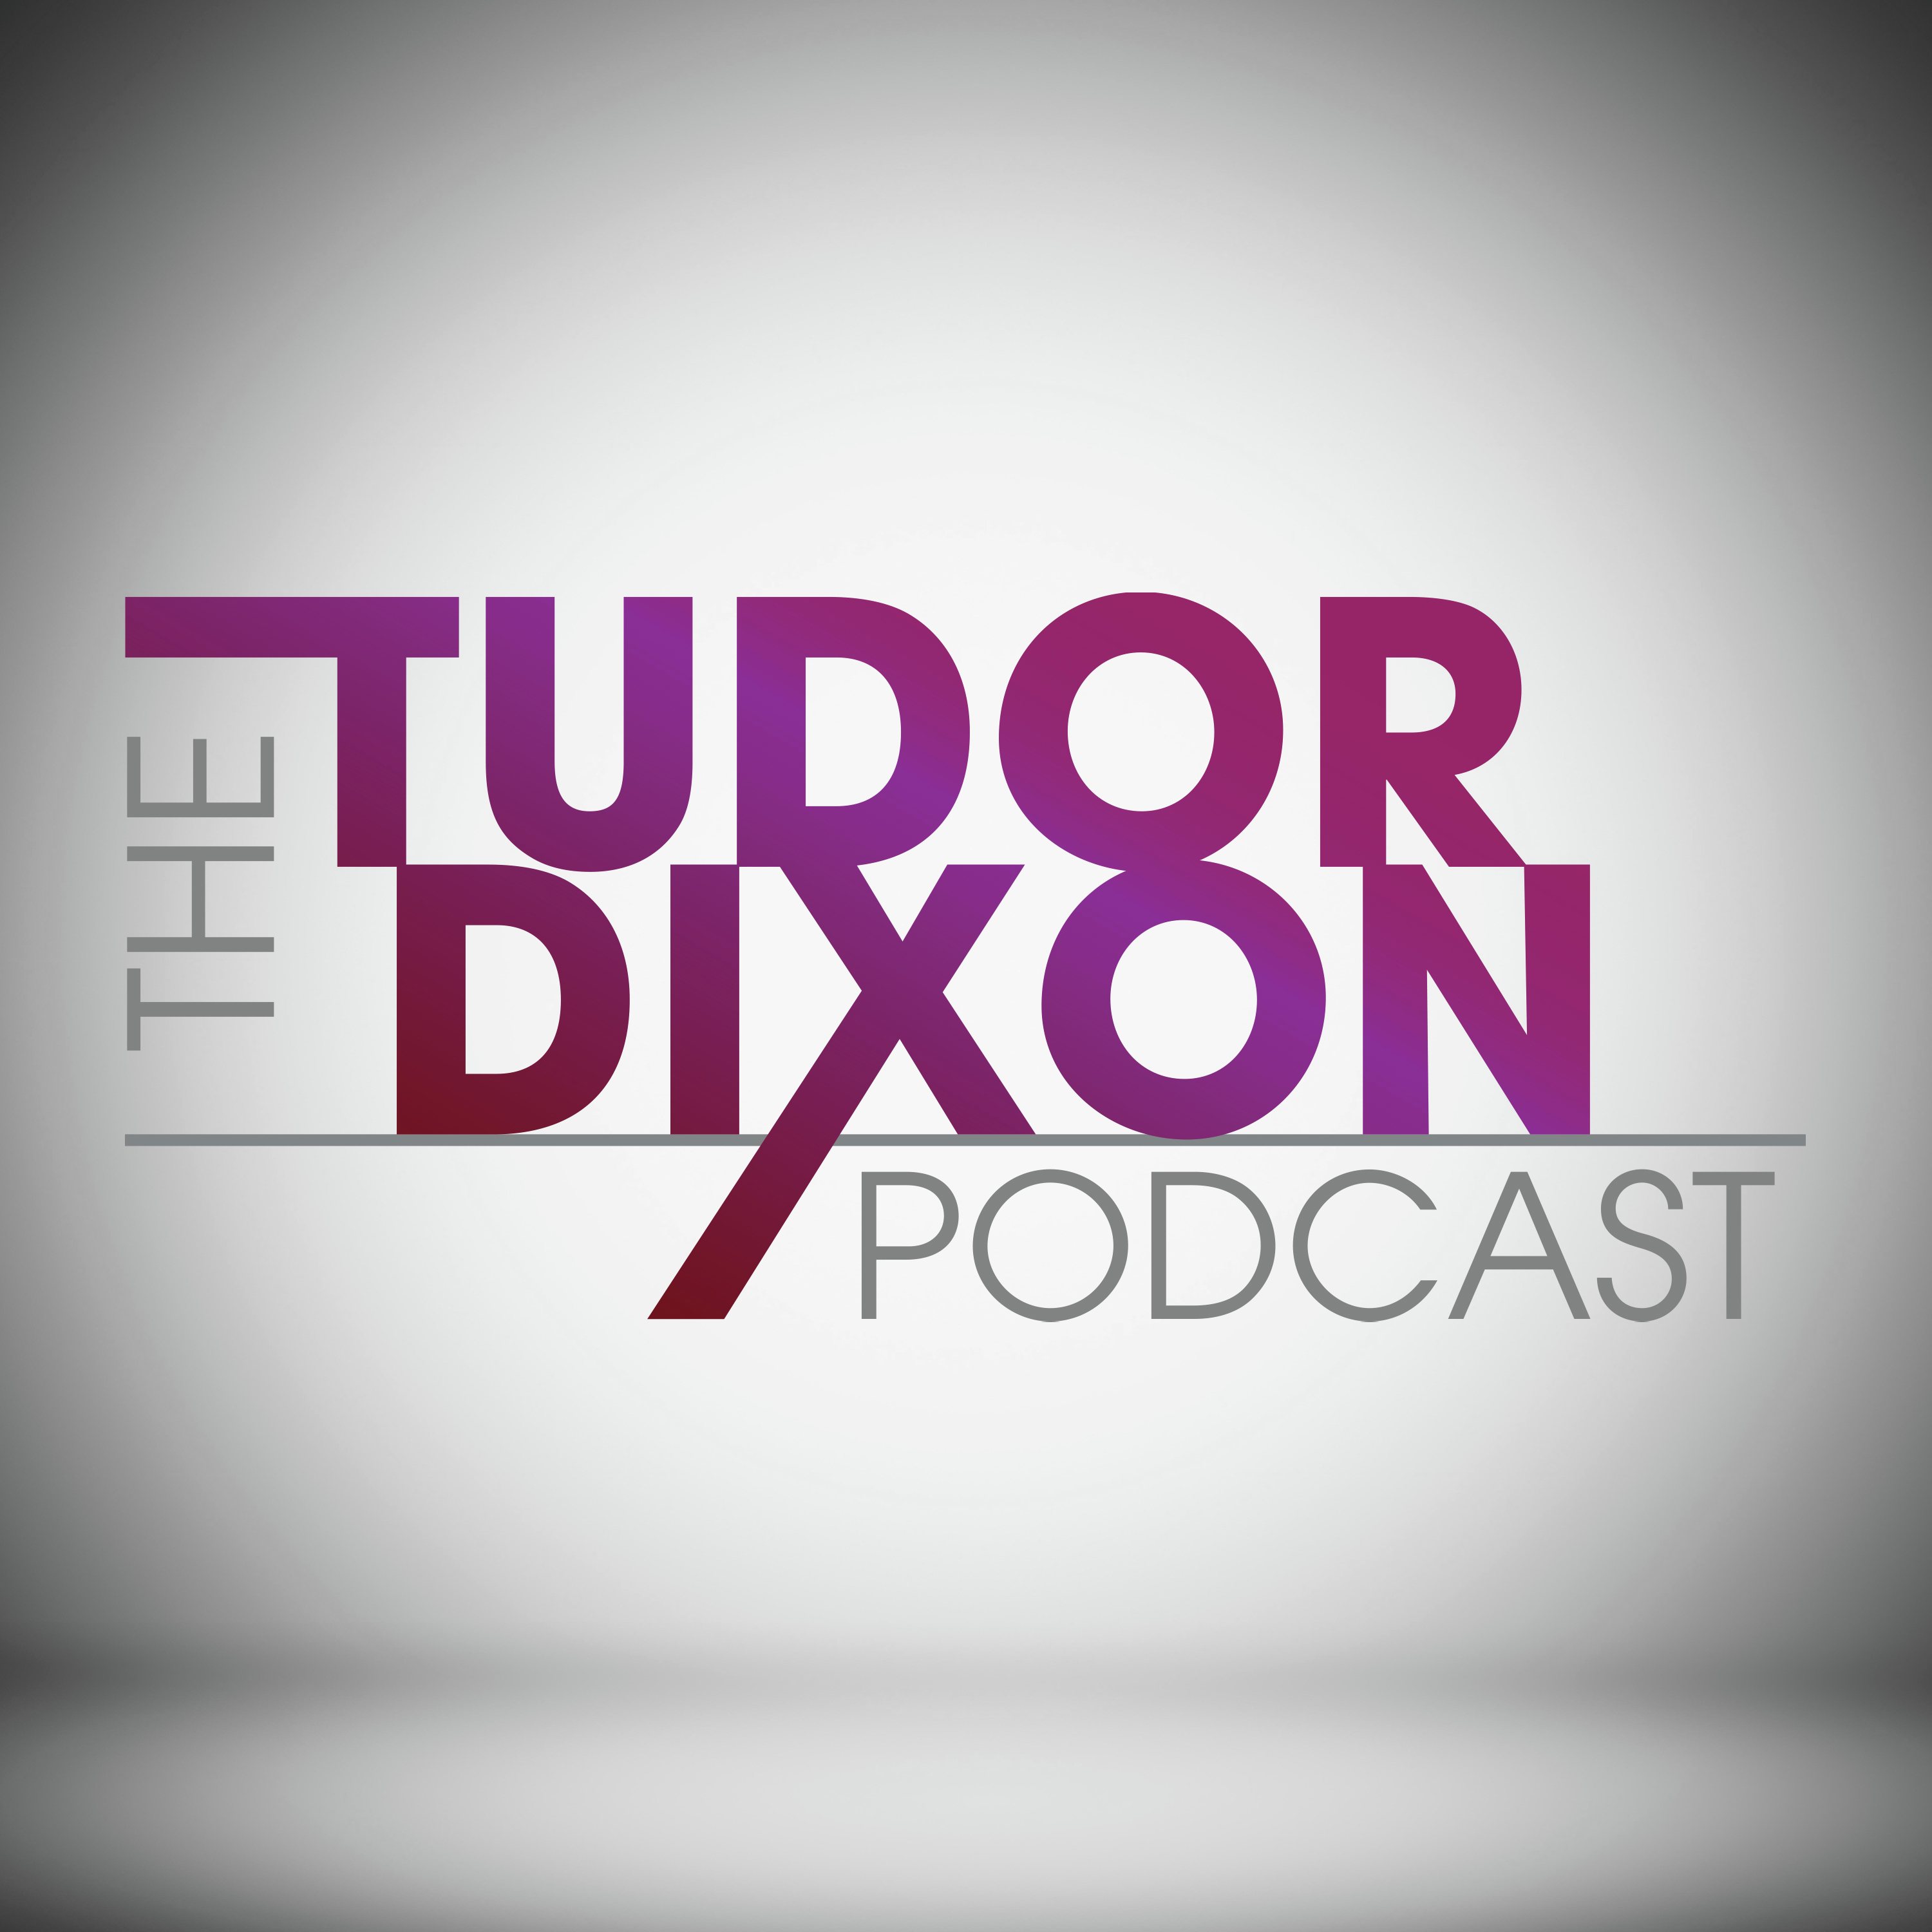 The Tudor Dixon Podcast: Restoring Integrity and Public Safety with Courtney Kramer